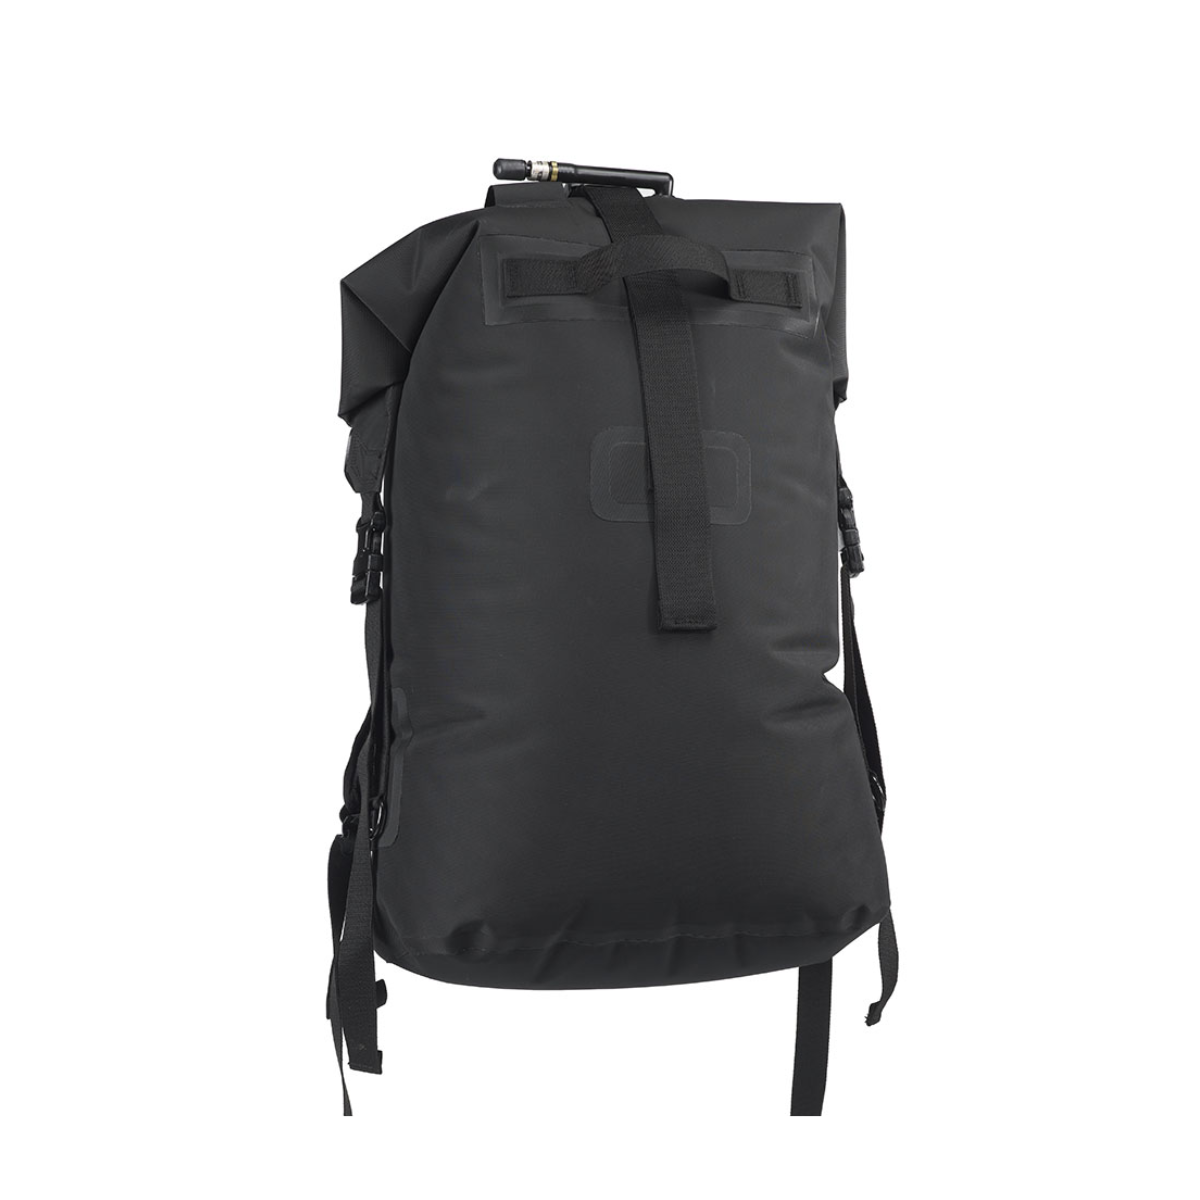 #288 Watershed MTP Zip Dry Assault Pack